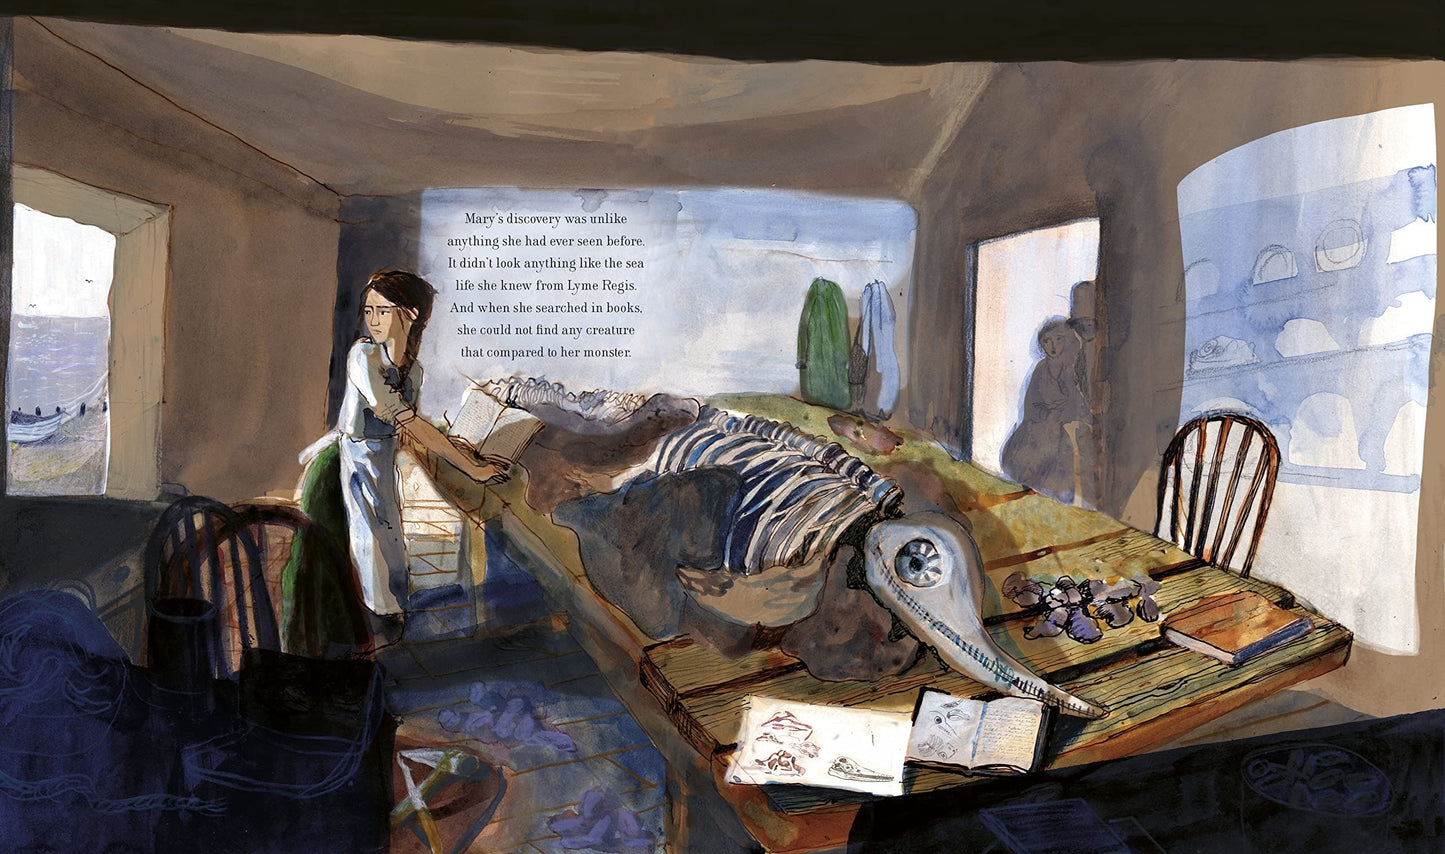 Load image into Gallery viewer, Fossil Hunter: How Mary Anning Unearthed The Truth
